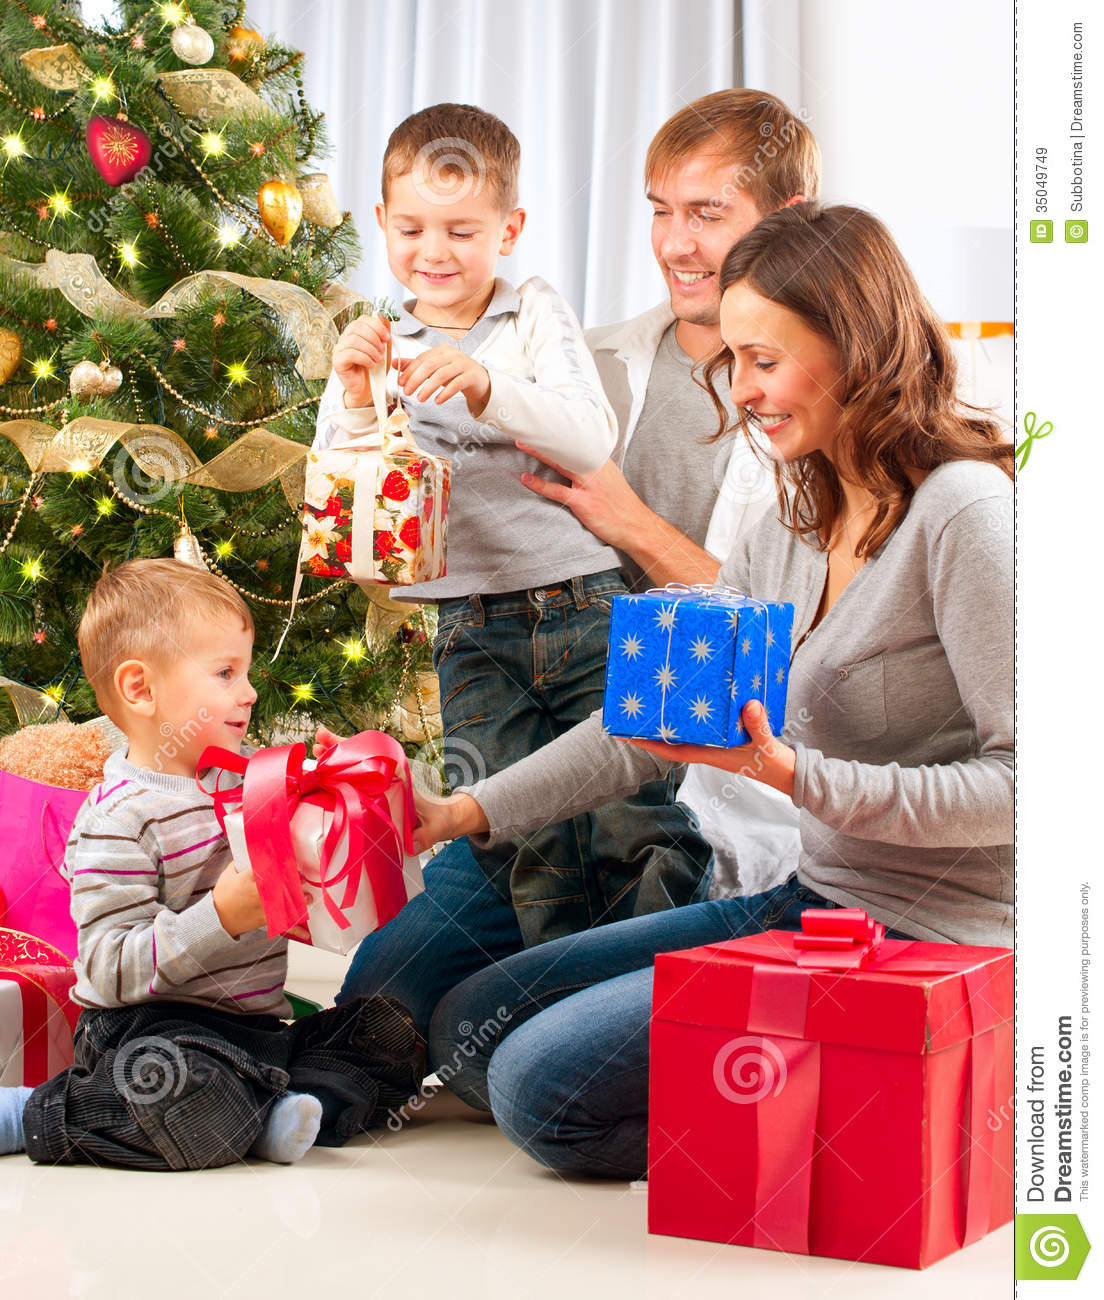 Gifts For Families With Kids
 Christmas Family stock image Image of open room festive